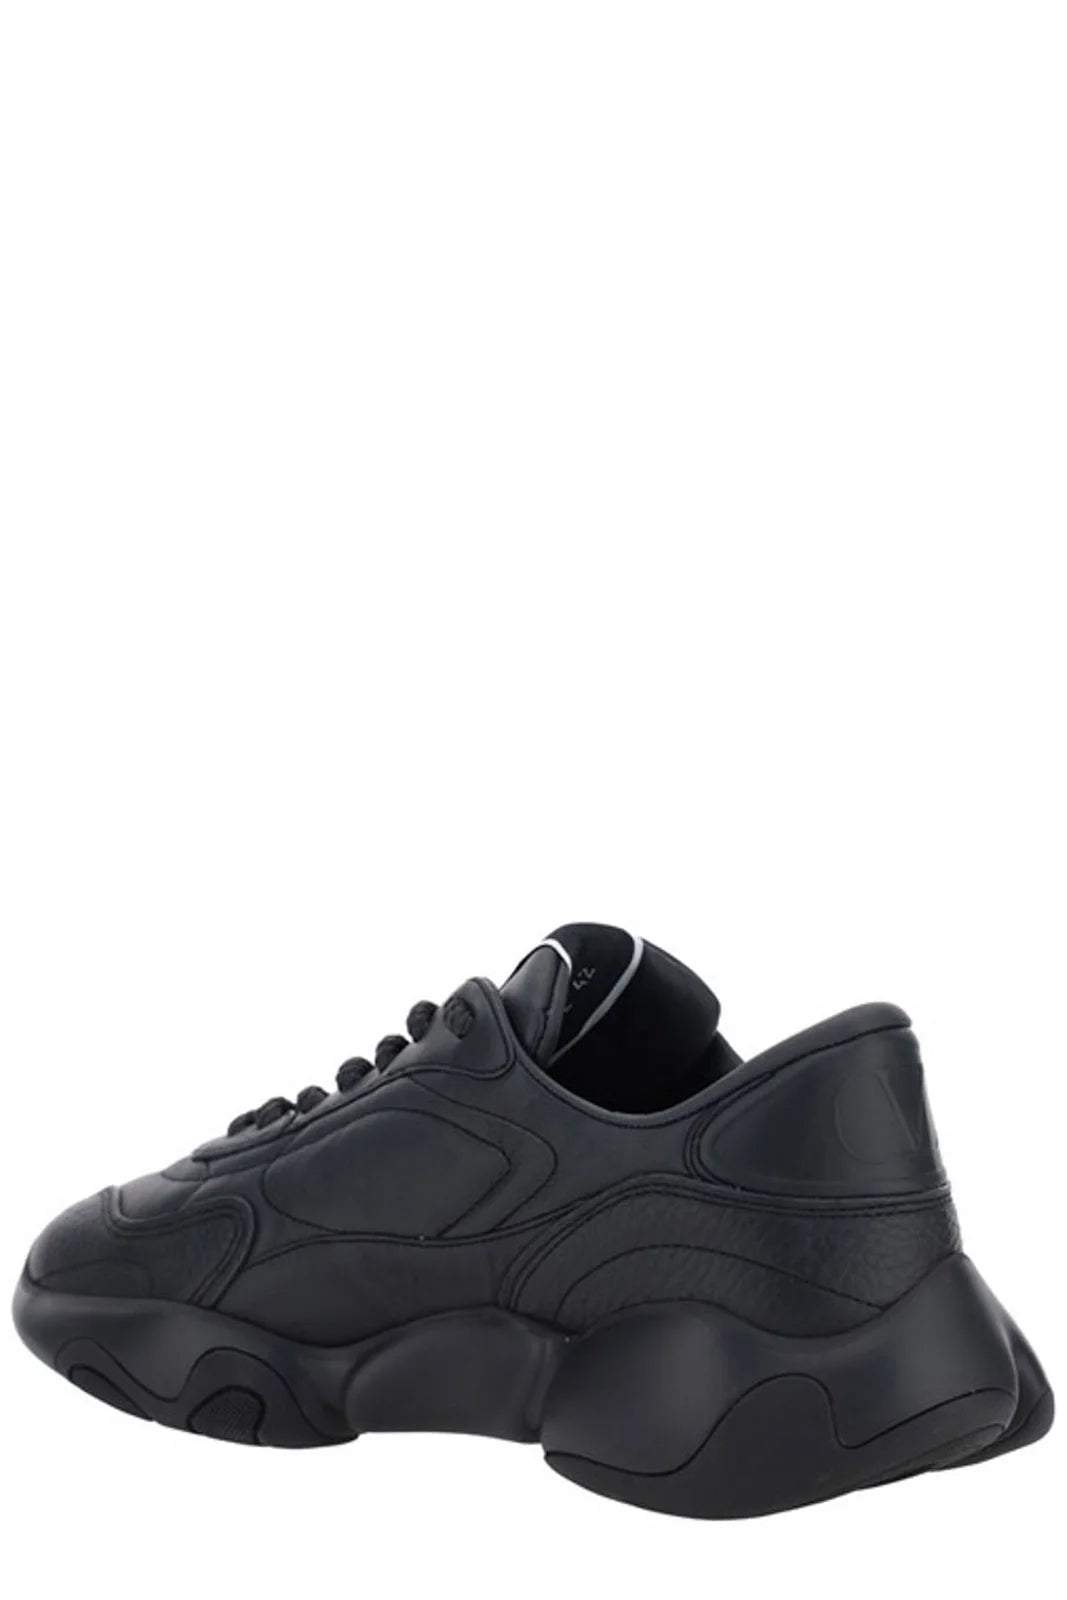 Valentino Black Calf Leather Garavani Sneakers #men, Black, EU40/US7, EU41/US8, EU42/US9, EU44/US11, feed-agegroup-adult, feed-color-Black, feed-gender-male, Men - New Arrivals, Sneakers - Men - Shoes, Valentino at SEYMAYKA